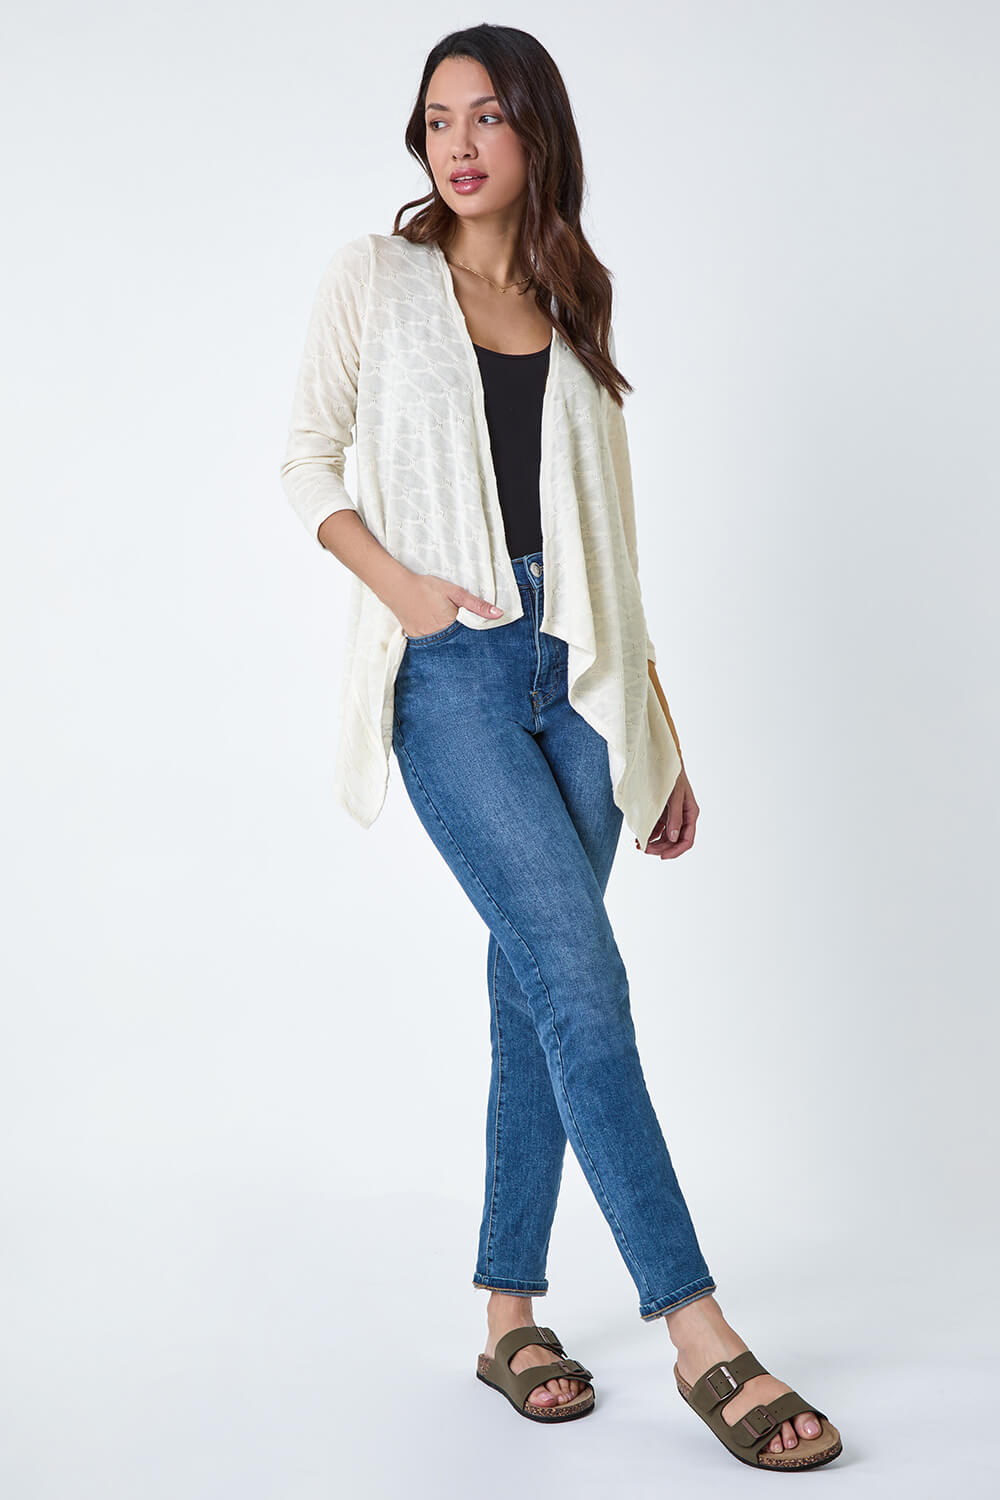 Stone Textured Waterfall Knit Cardigan, Image 2 of 5